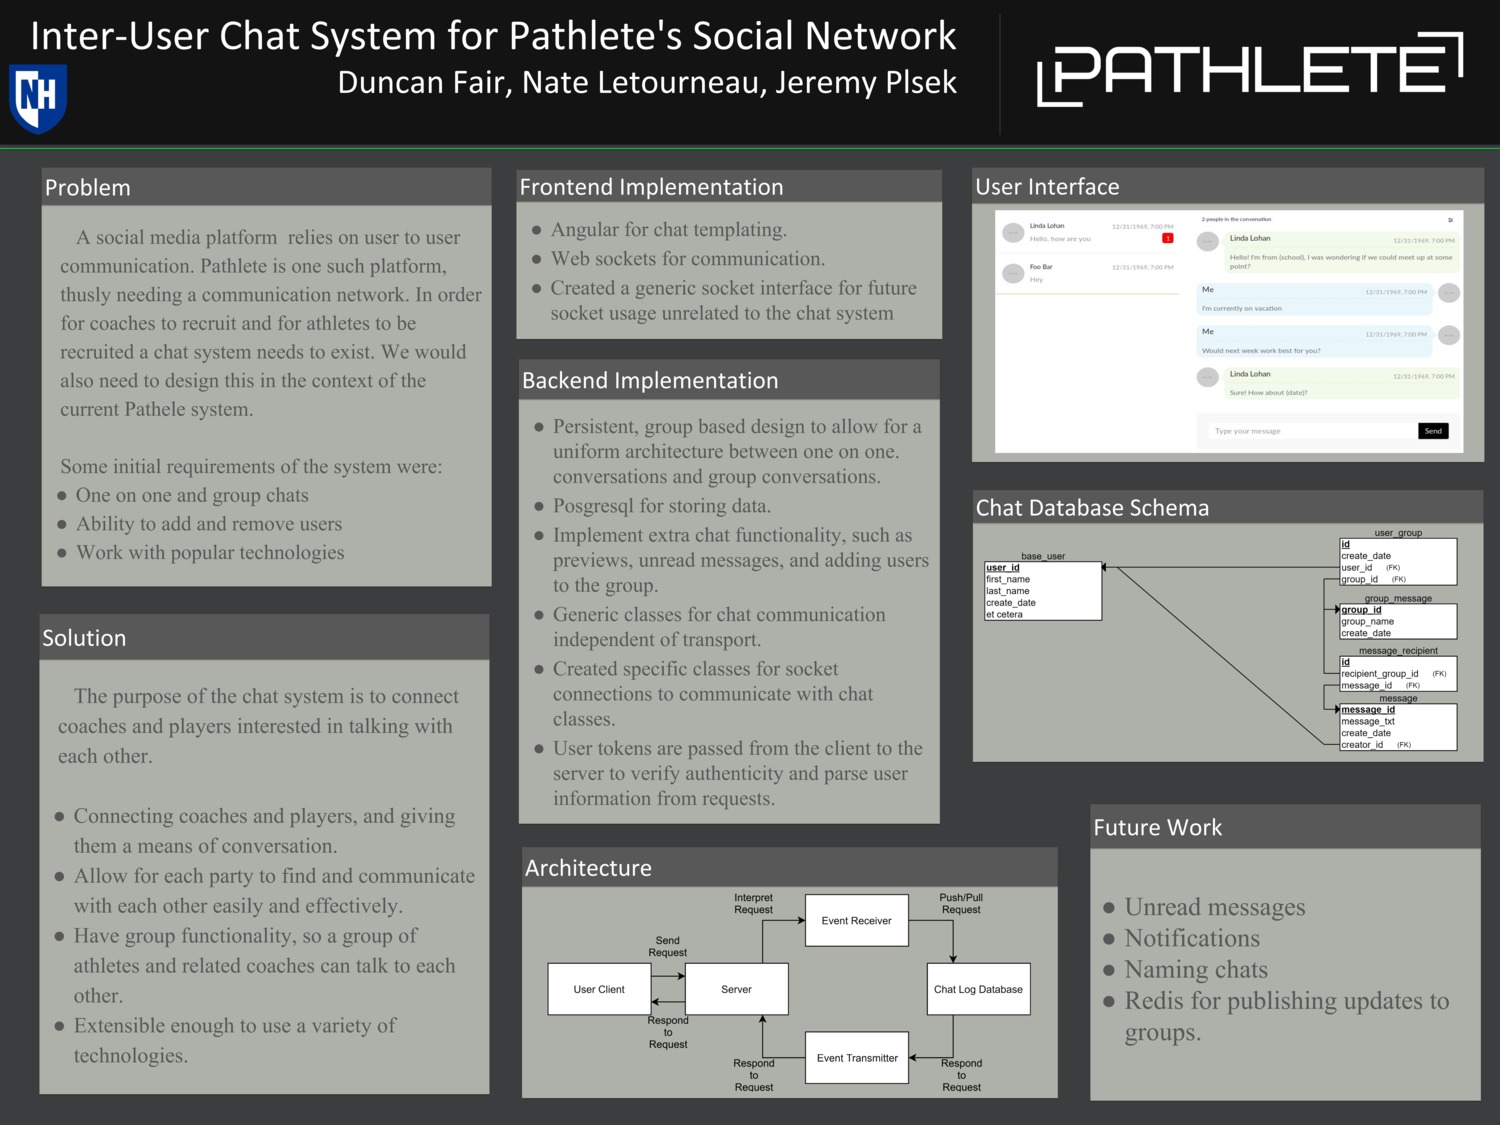 Inter-User Chat System For Pathlete's Social Network by nate603